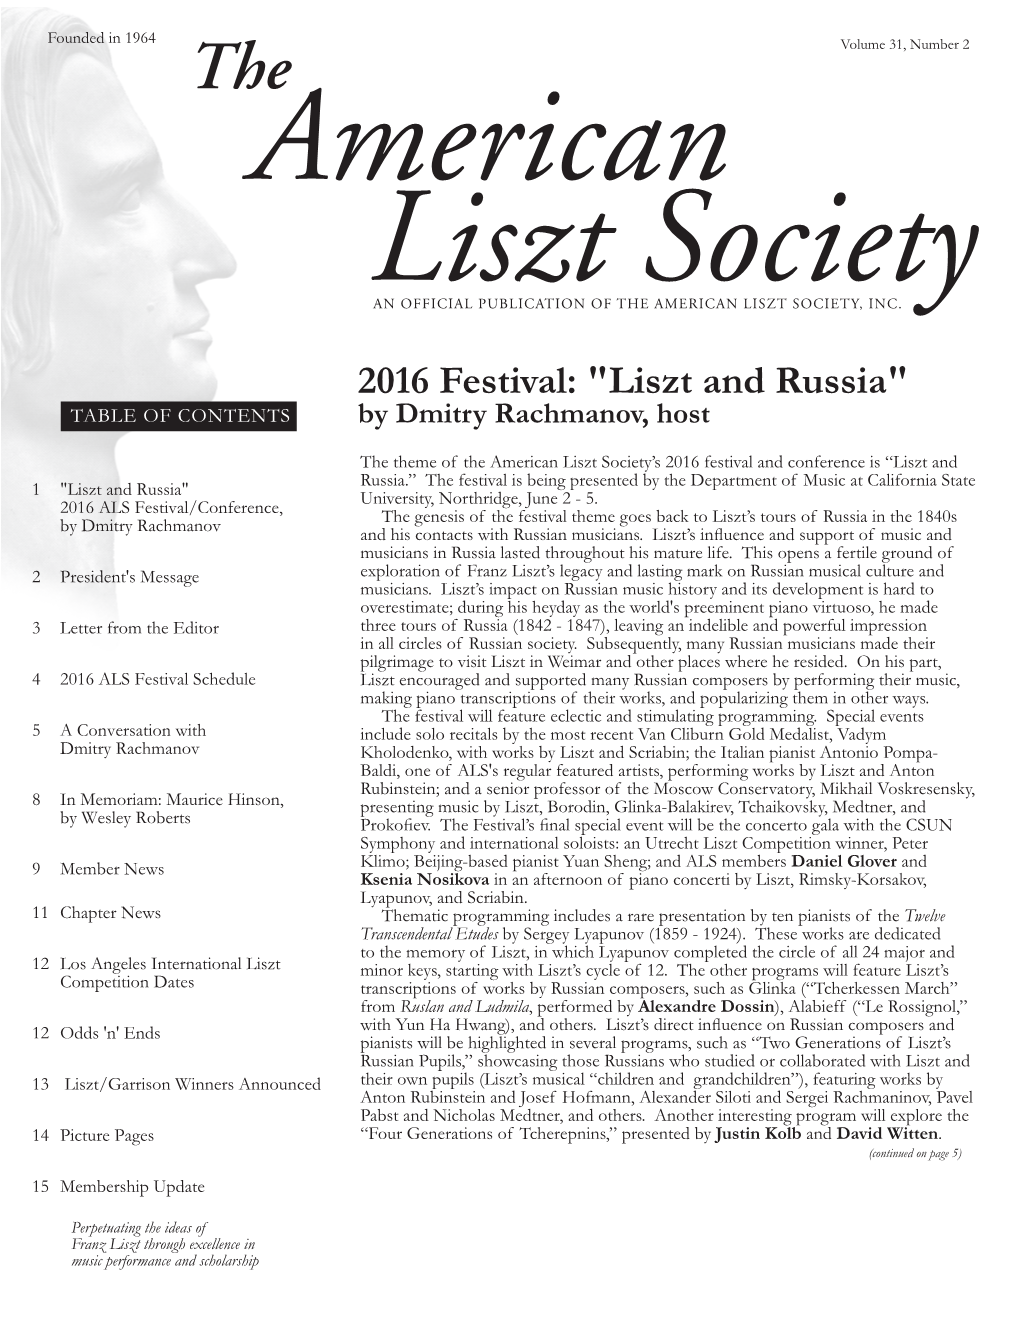 2016 Festival: "Liszt and Russia" TABLE of CONTENTS by Dmitry Rachmanov, Host